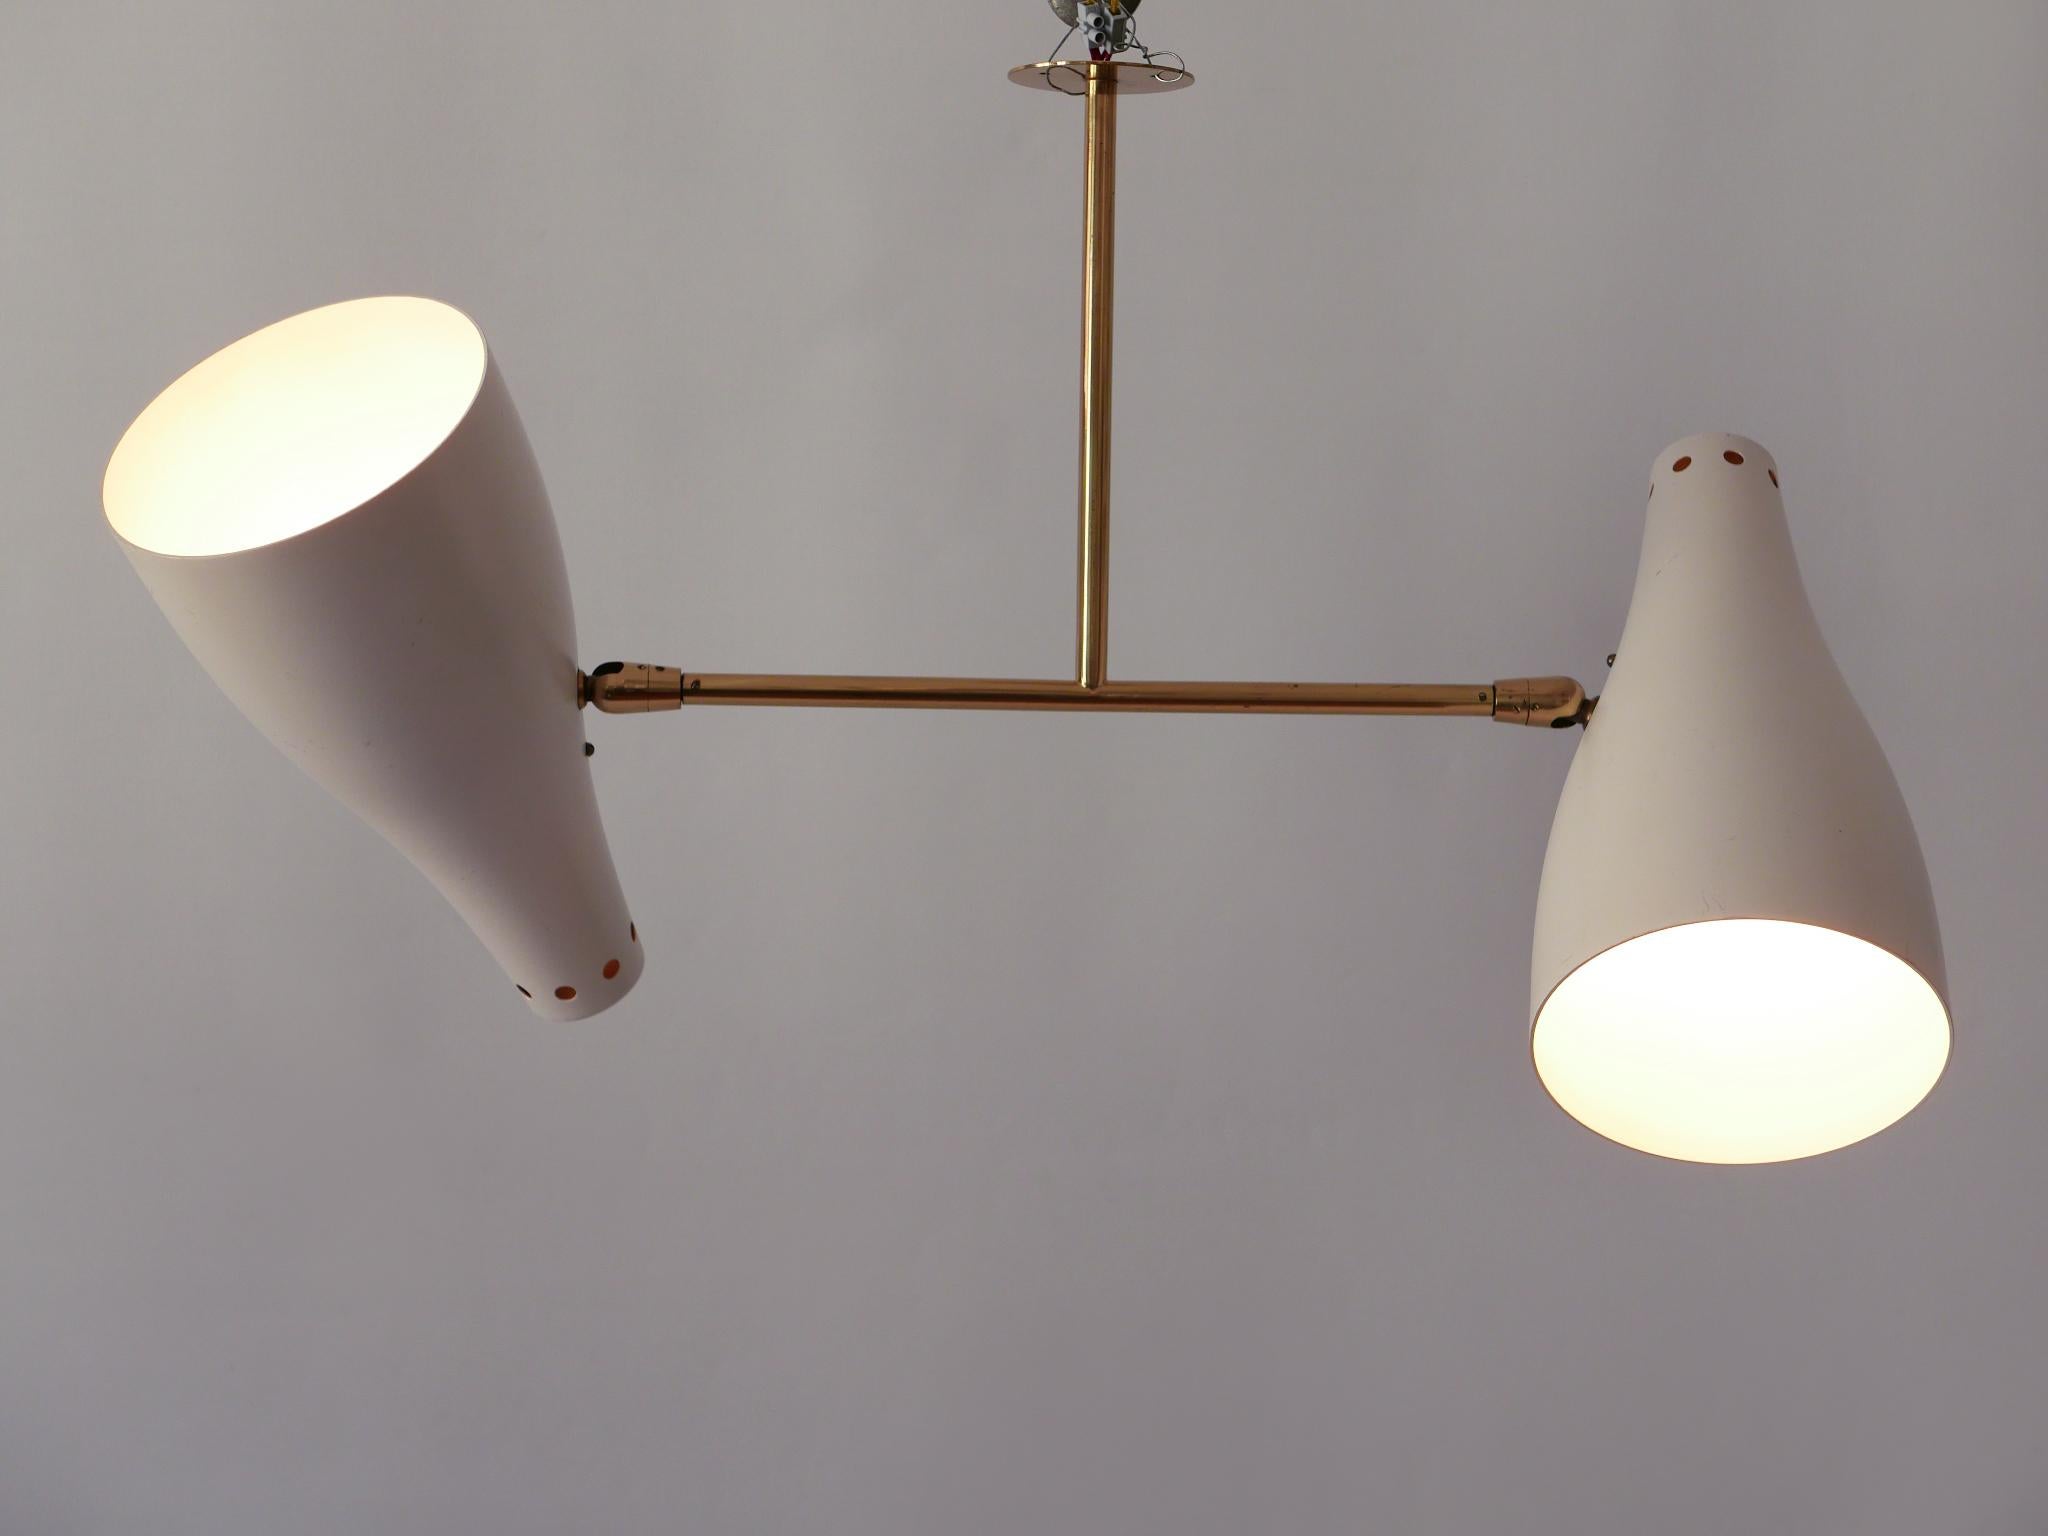 Extremely rare, elegant and articulated Mid-Century Modern two-armed sputnik ceiling fixture or pendant lamp. Adjustable shades. Designed & manufactured in Austria, 1950s.

Executed in brass and in beige color enameled aluminium, the lamp needs 2